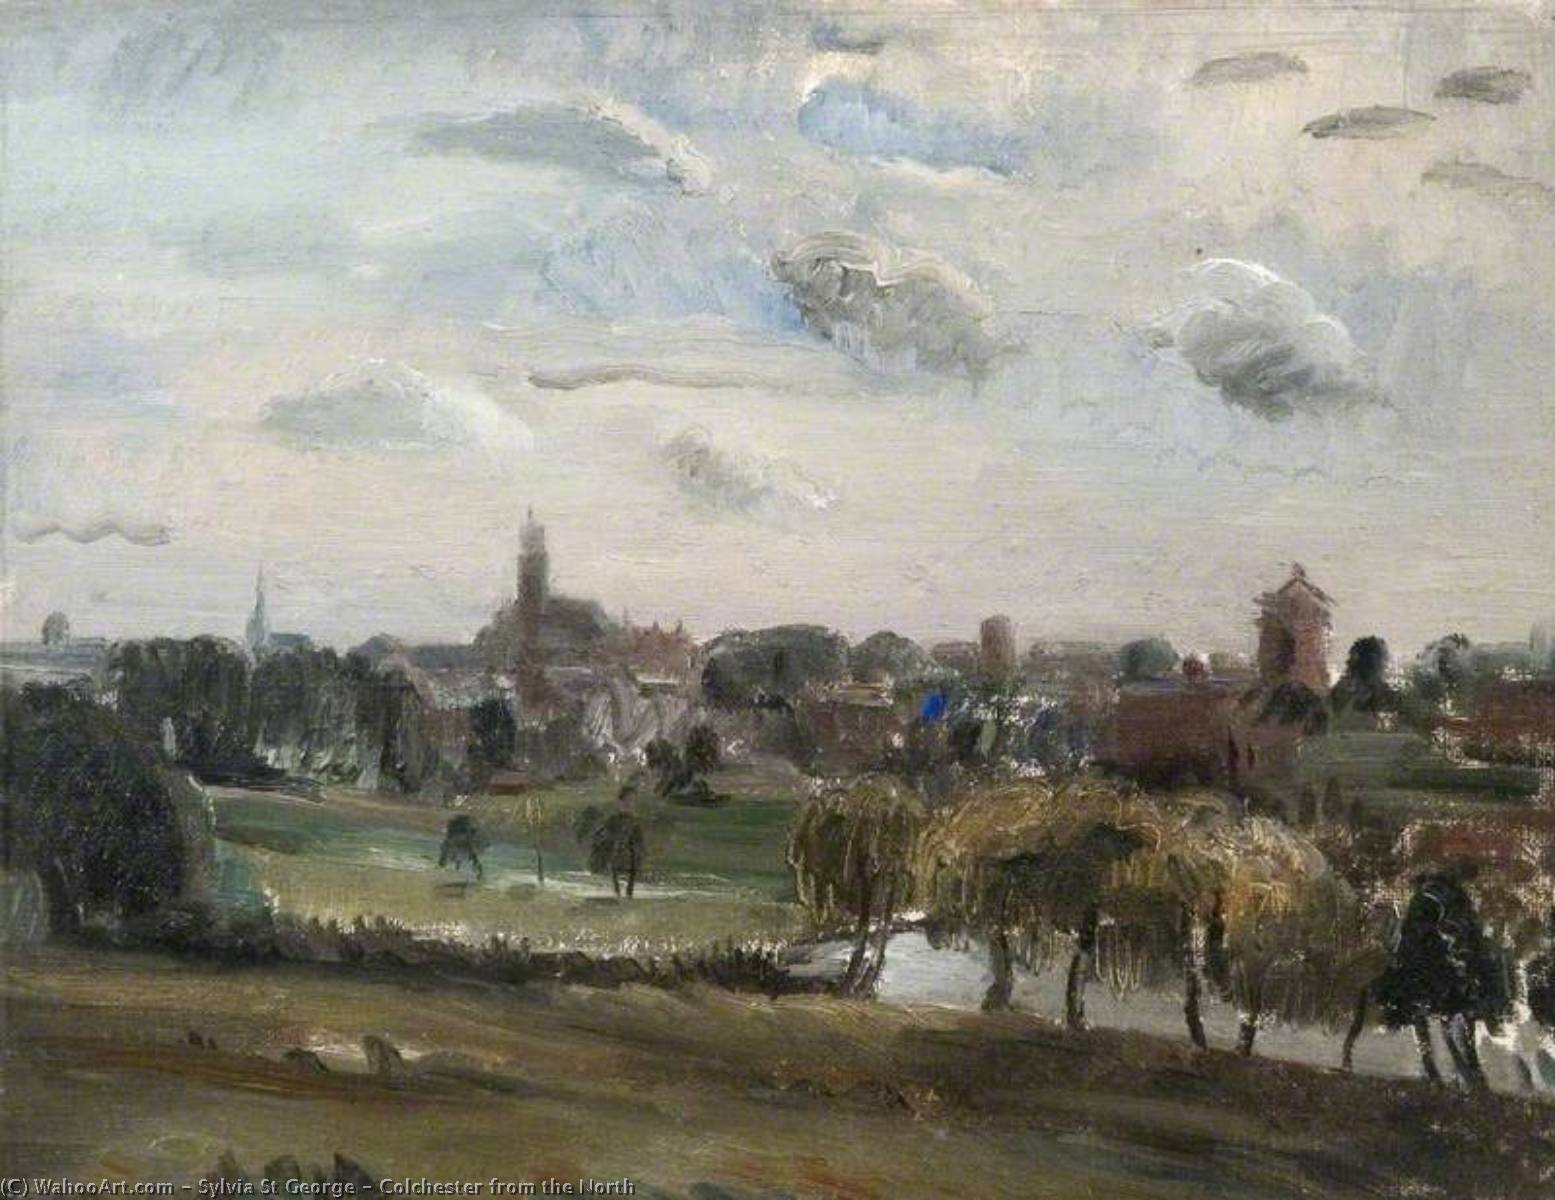 Colchester from the North, 1936 by Sylvia St George Sylvia St George | ArtsDot.com